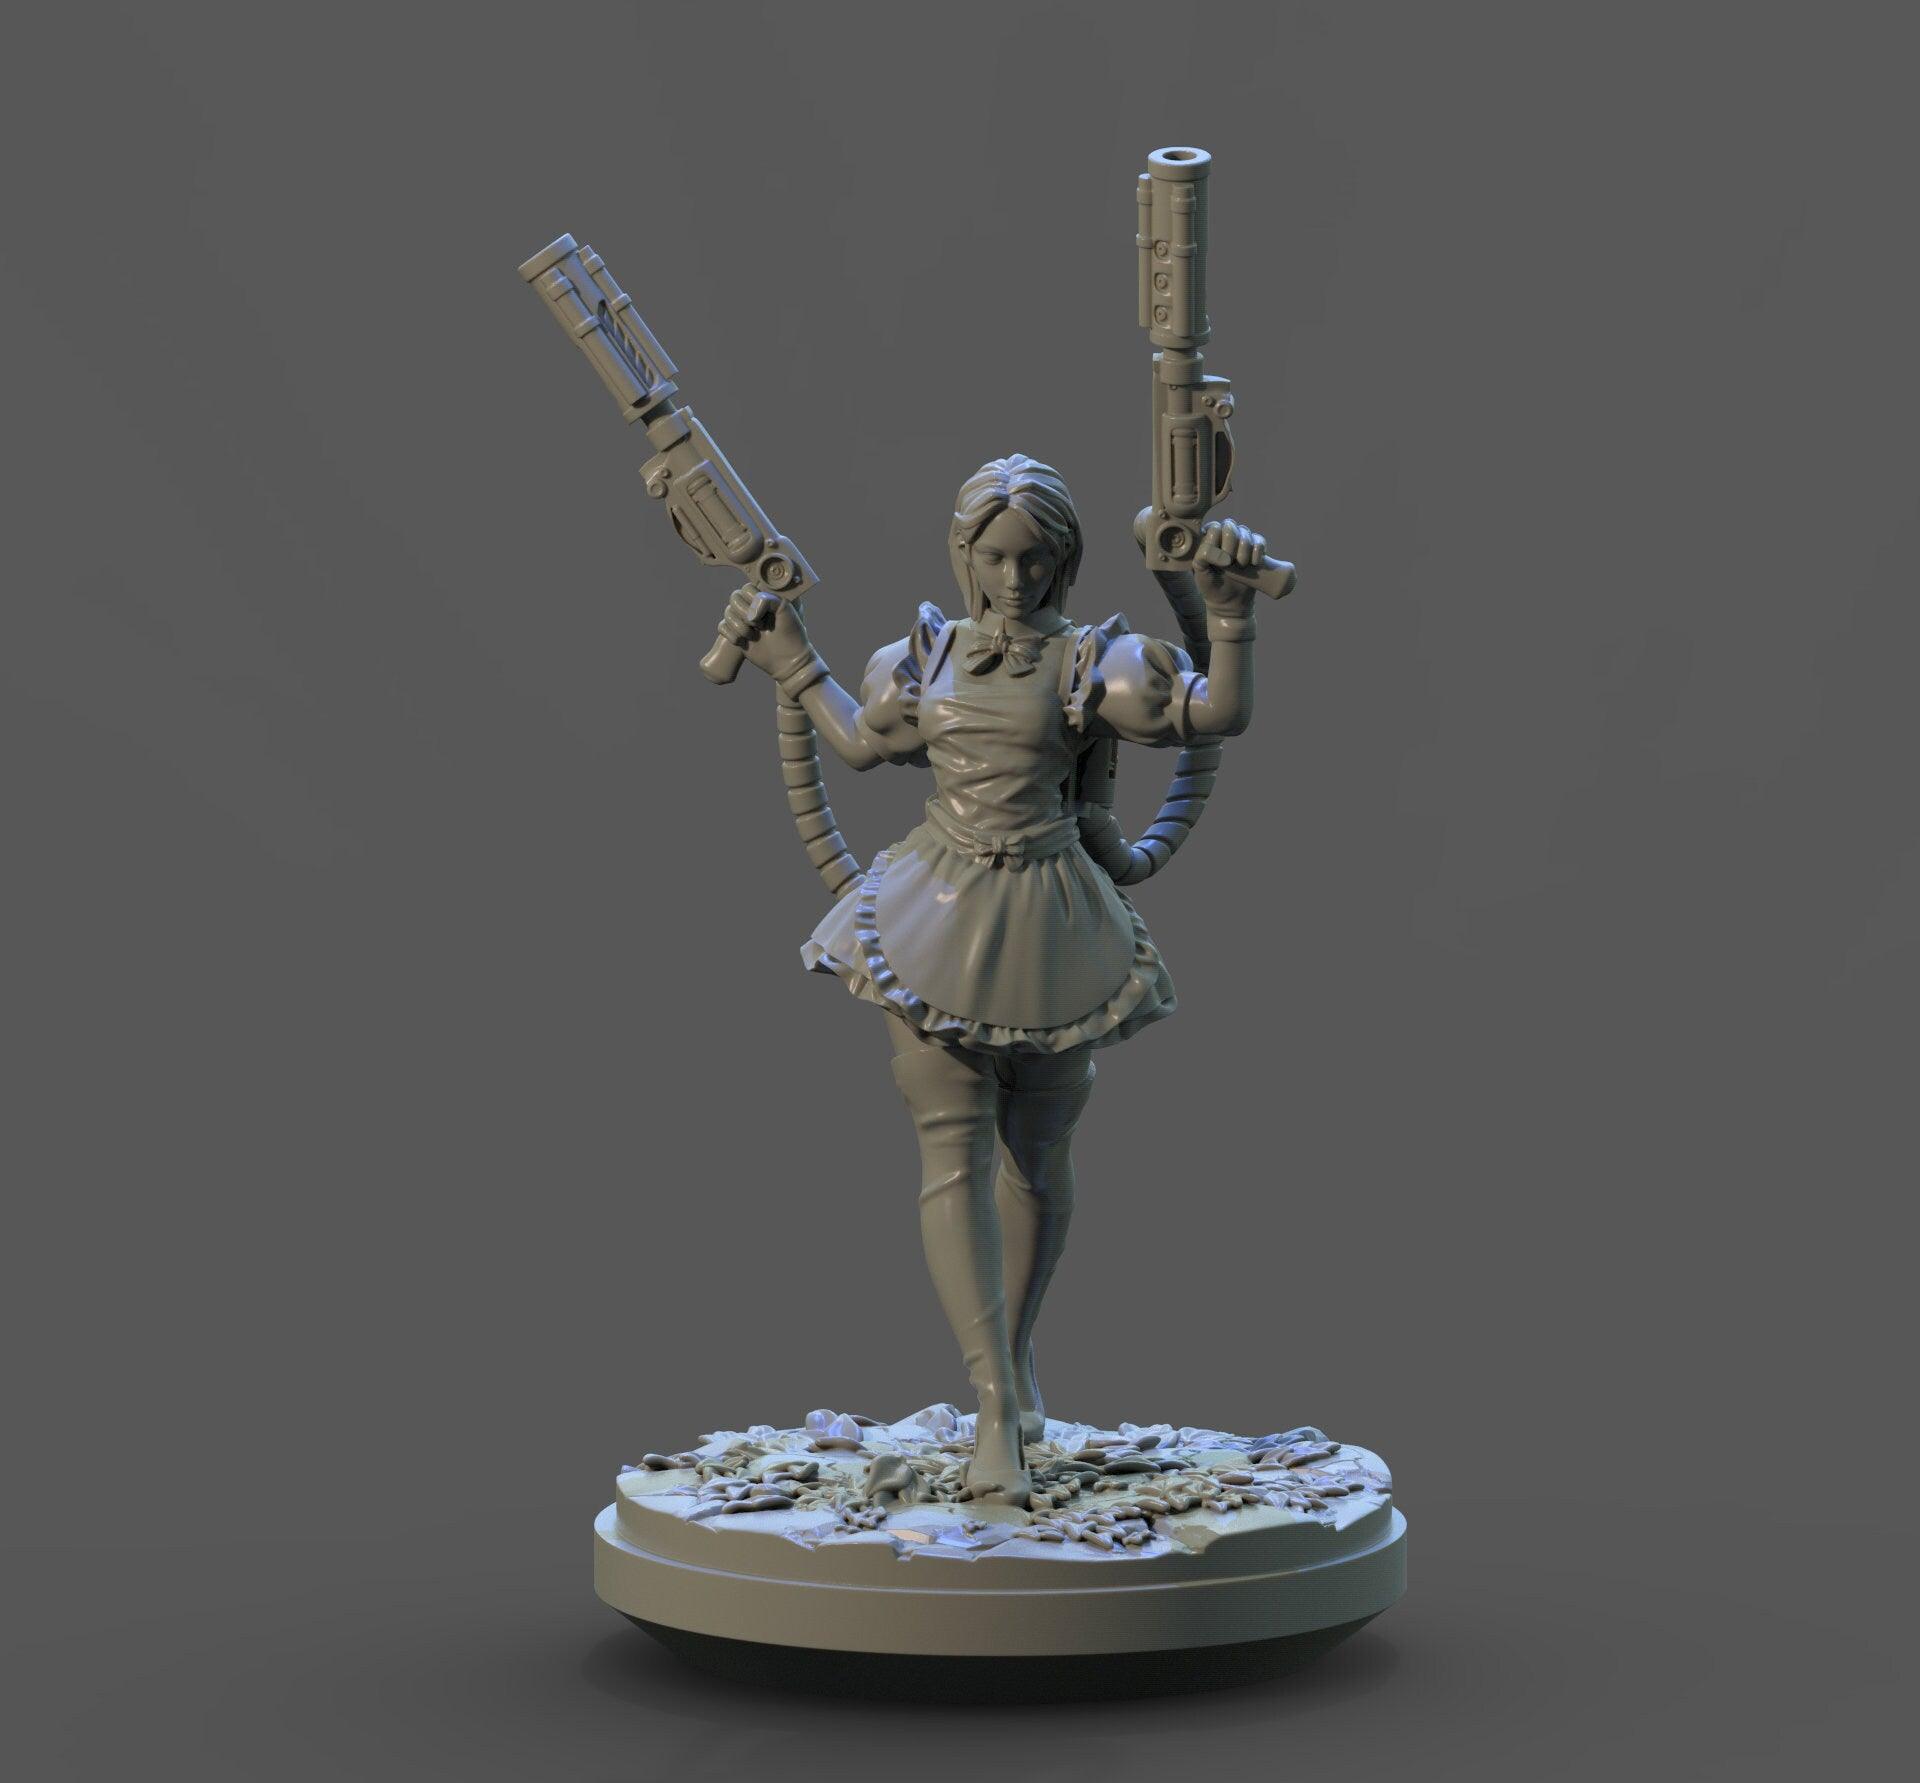 Alice in Wonderland Female Warrior Miniature | DnD 5e Miniature for Dungeons and Dragons | 32mm Scale - Plague Miniatures shop for DnD Miniatures